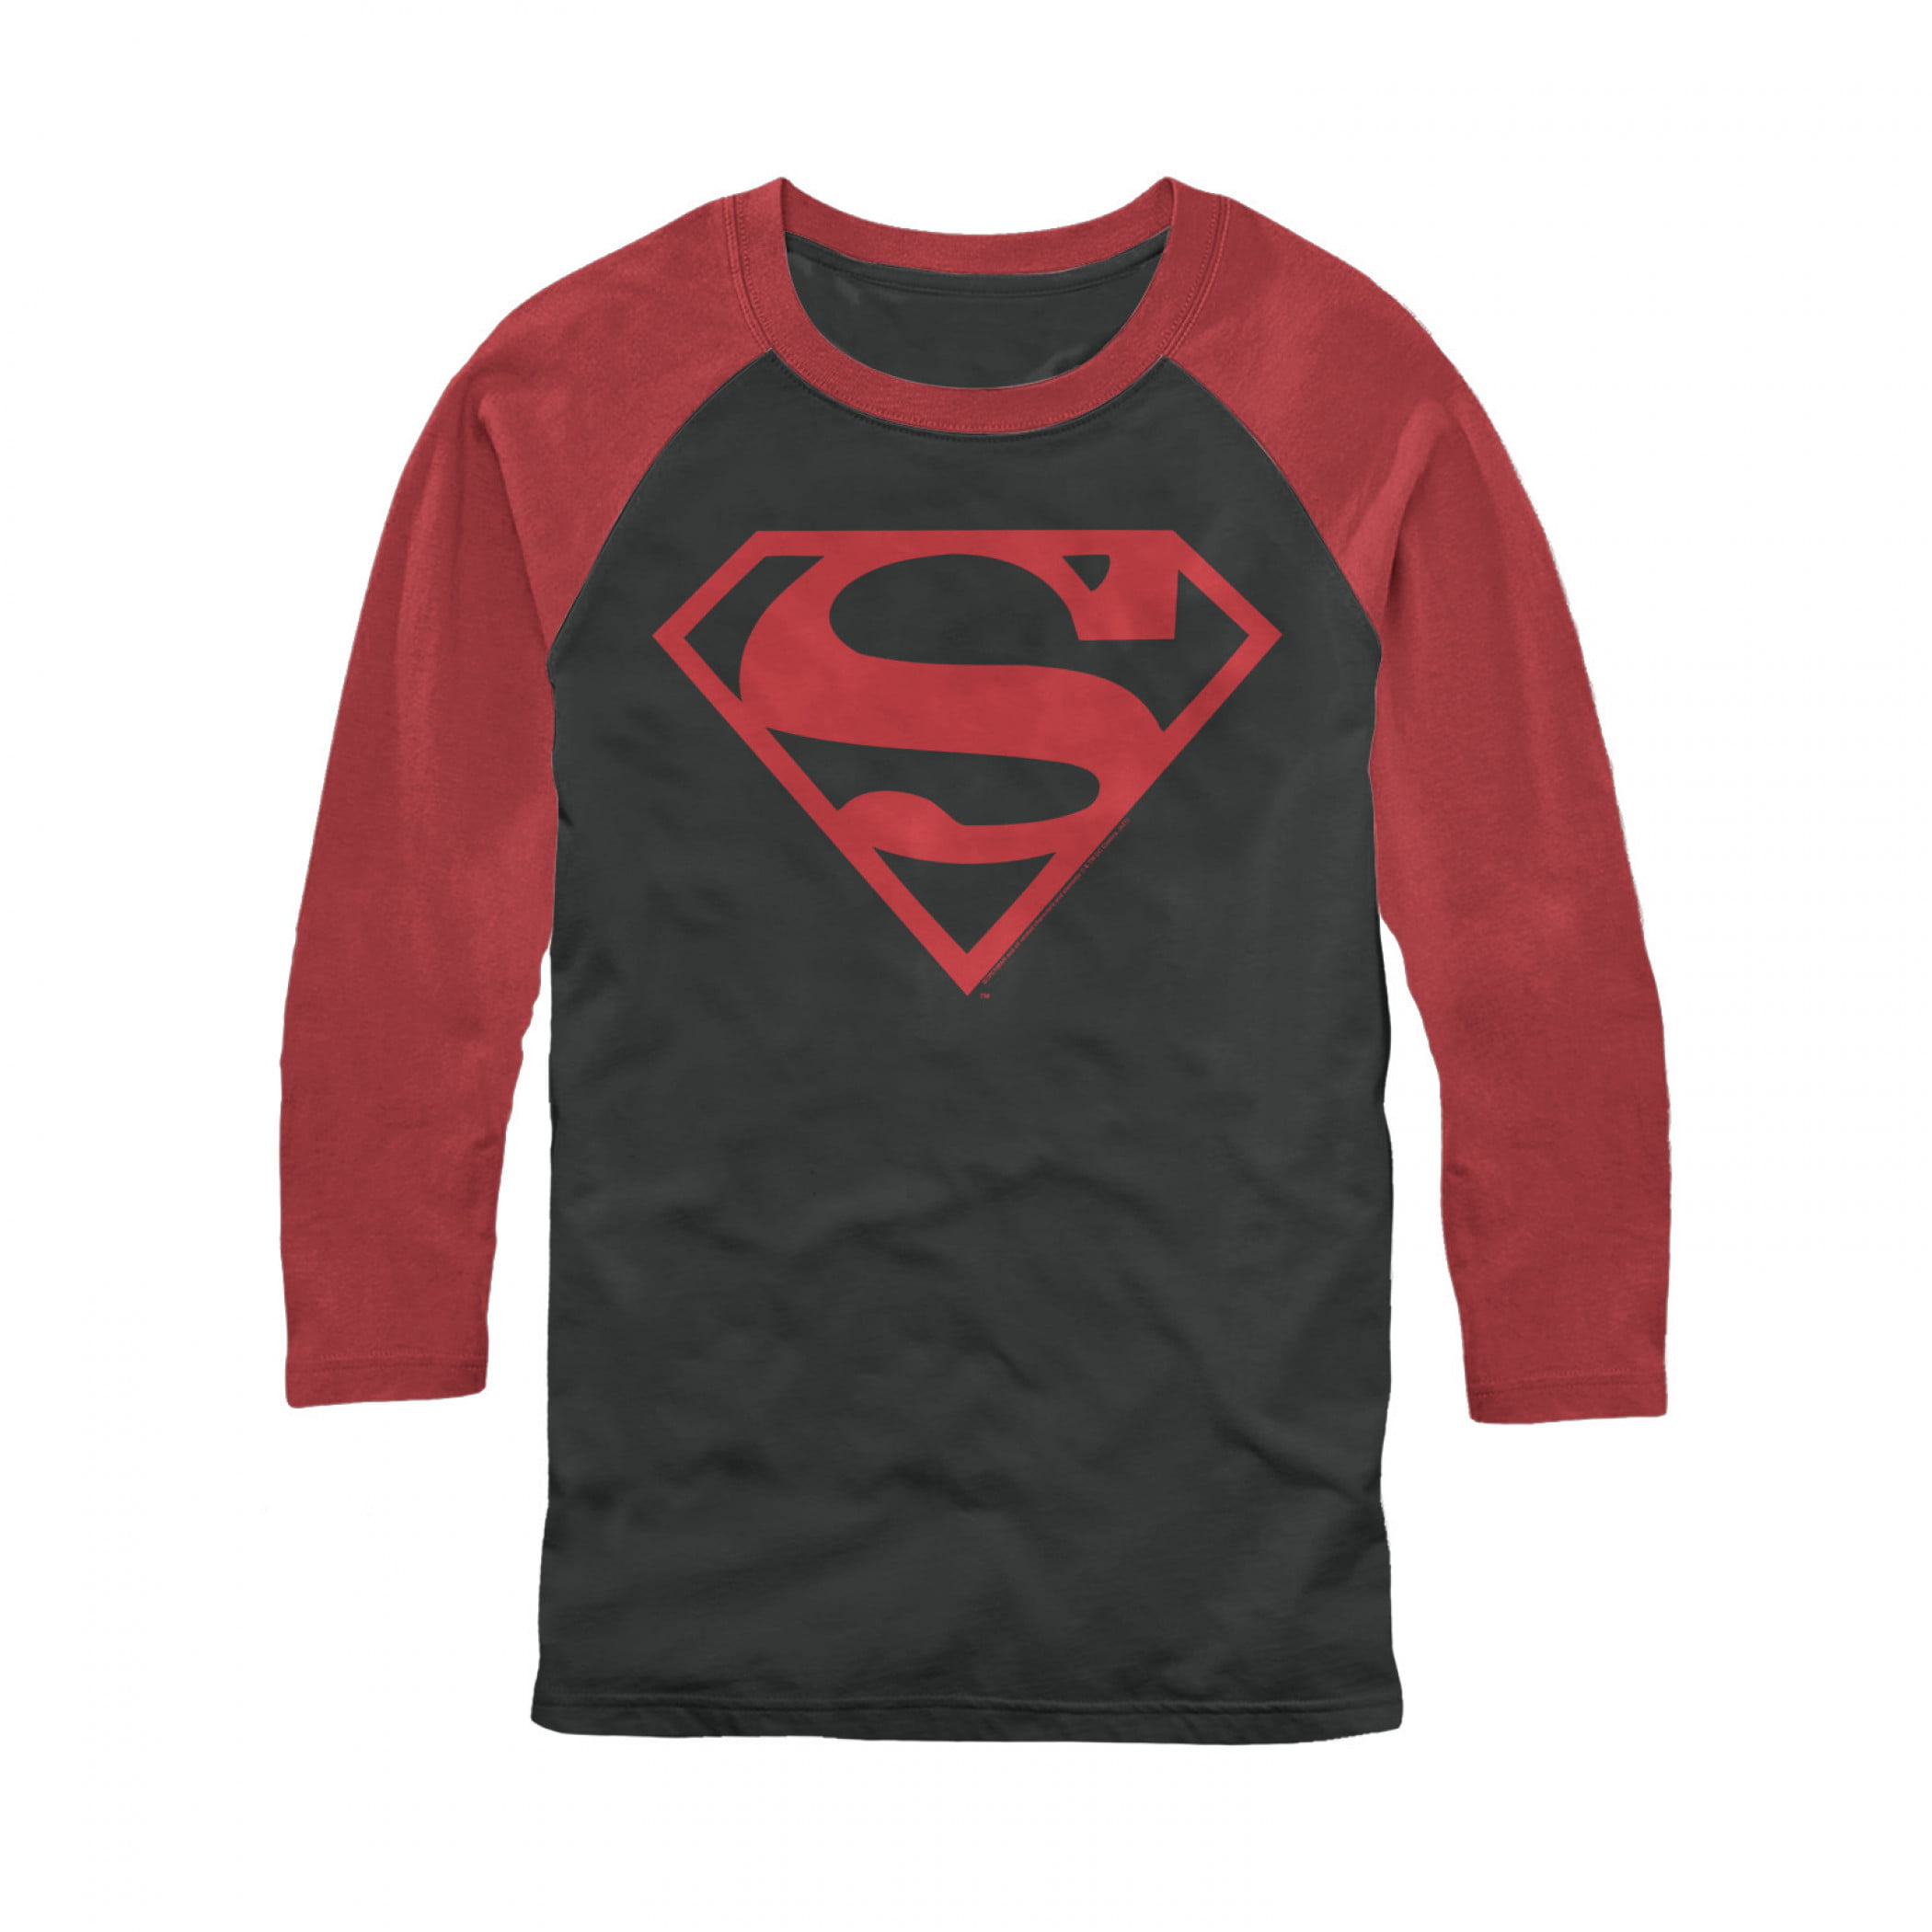 BOYS GIRLS KIDS SUPERMAN LONG SLEEVE T-SHIRT **OFFICIALLY LICENSED PRODUCT** 